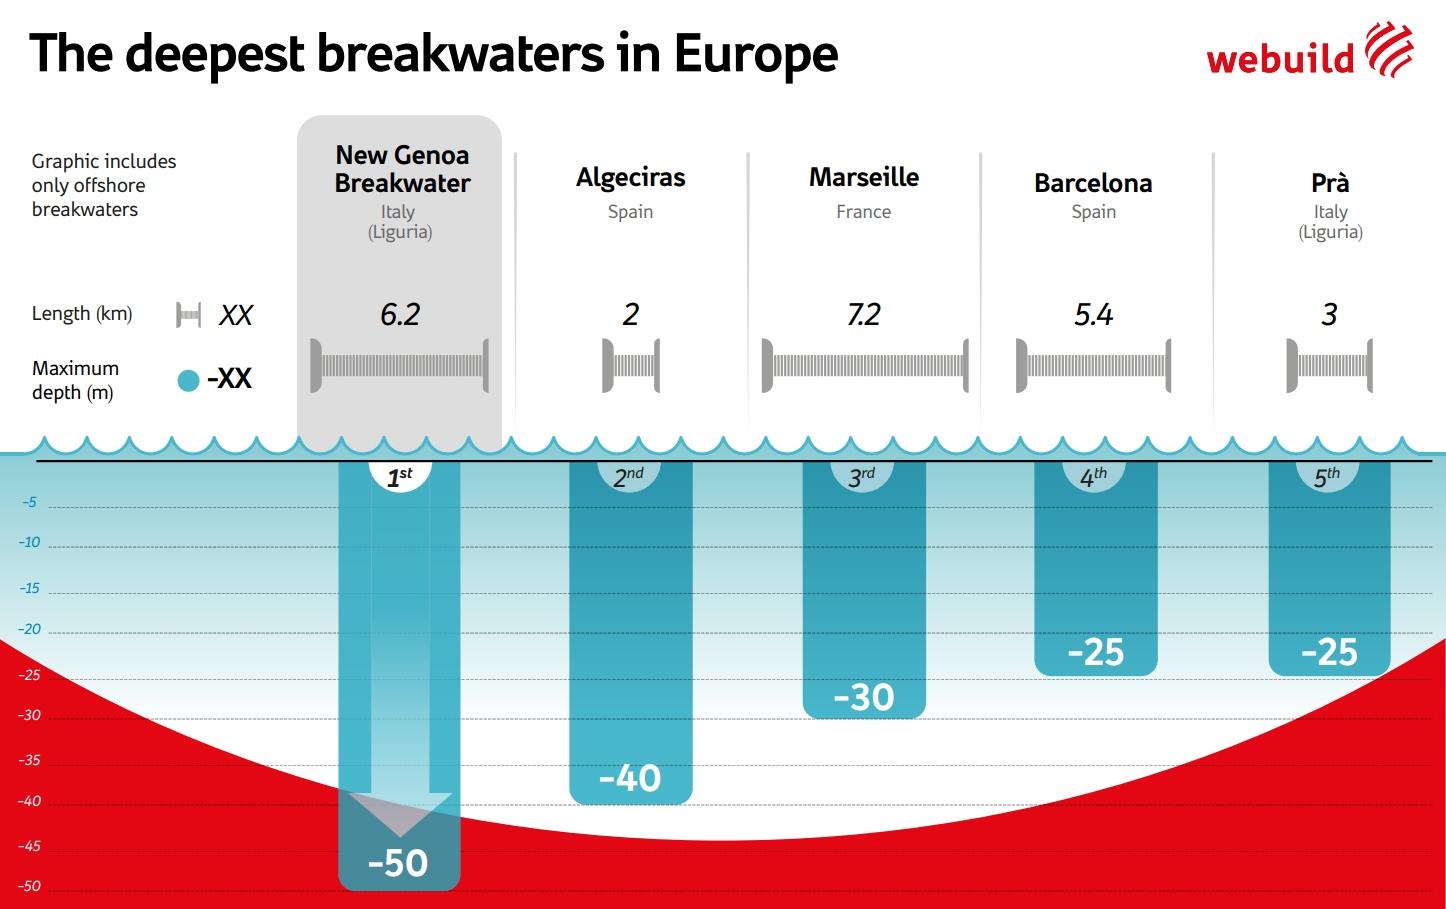 The deepest breakwaters in Europe, infographic